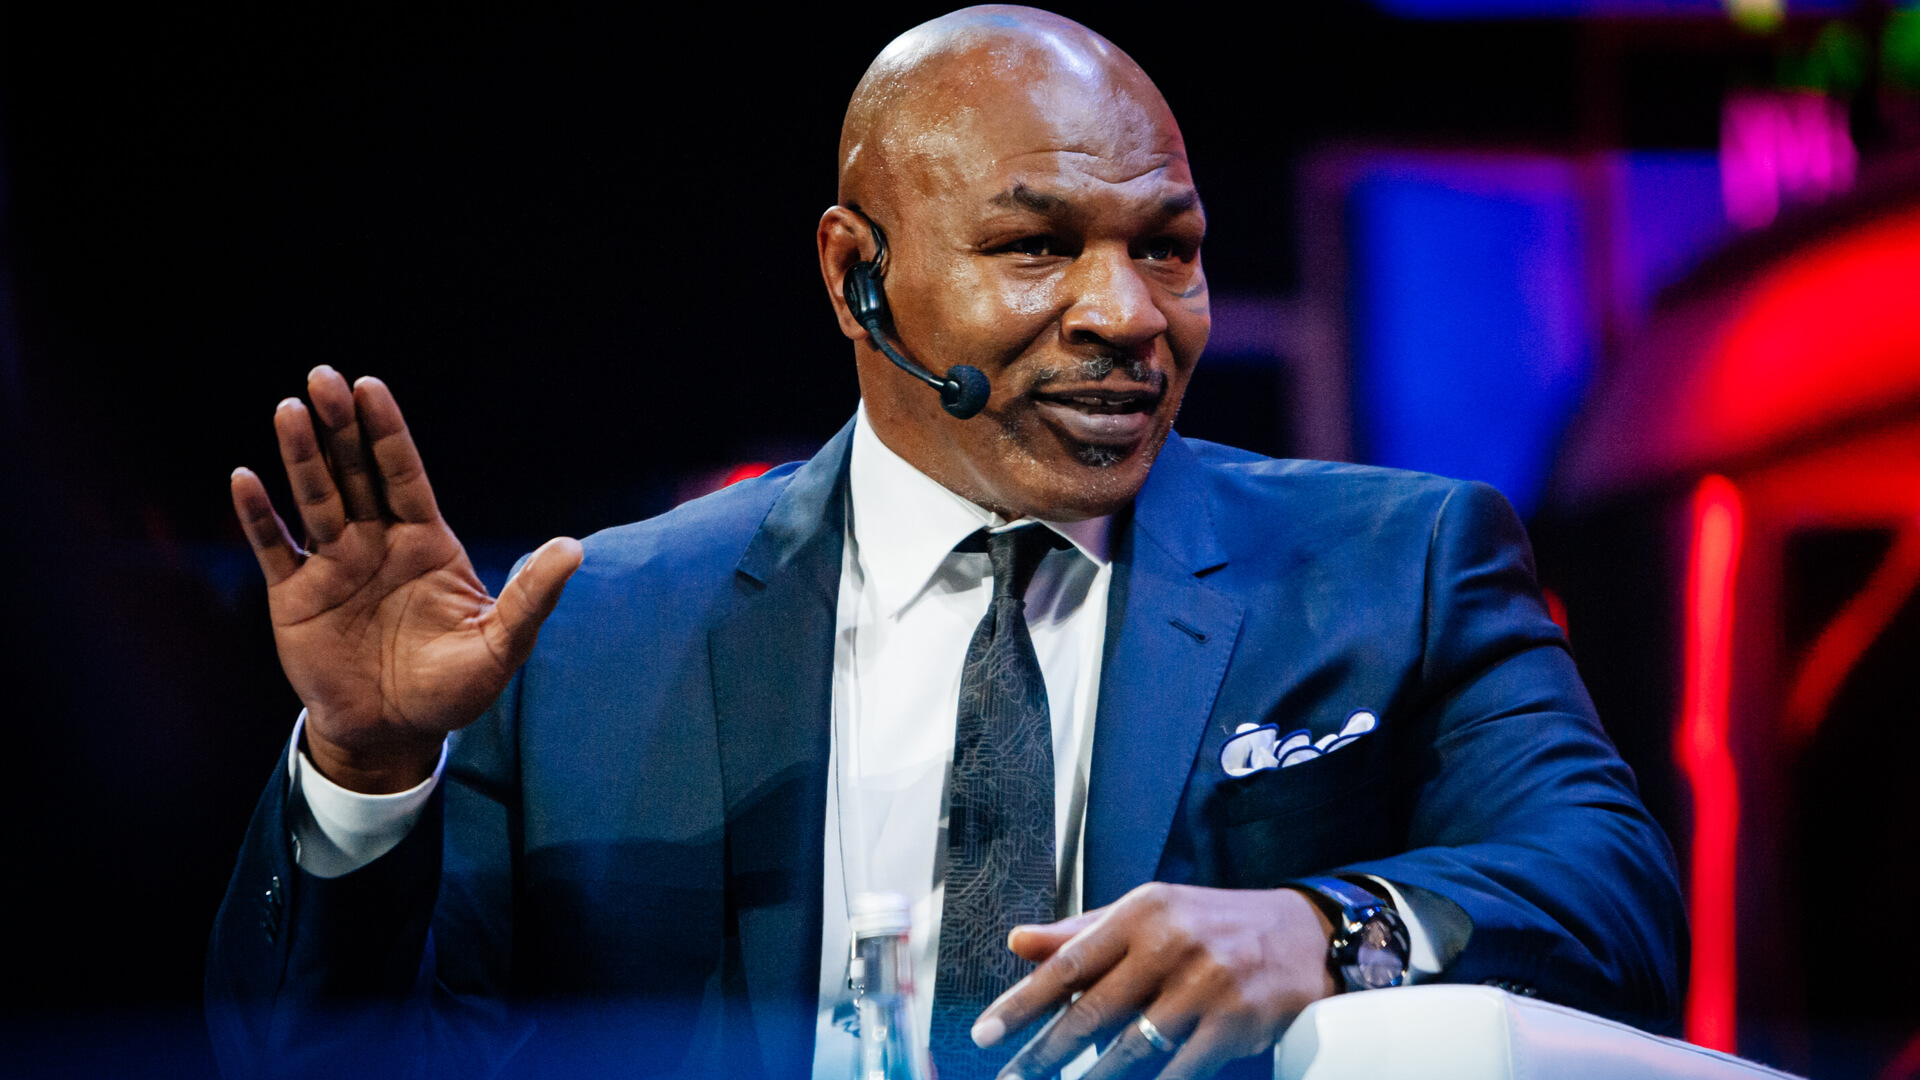 Mike Tyson speaking at the Synergy Global Forum in Moscow